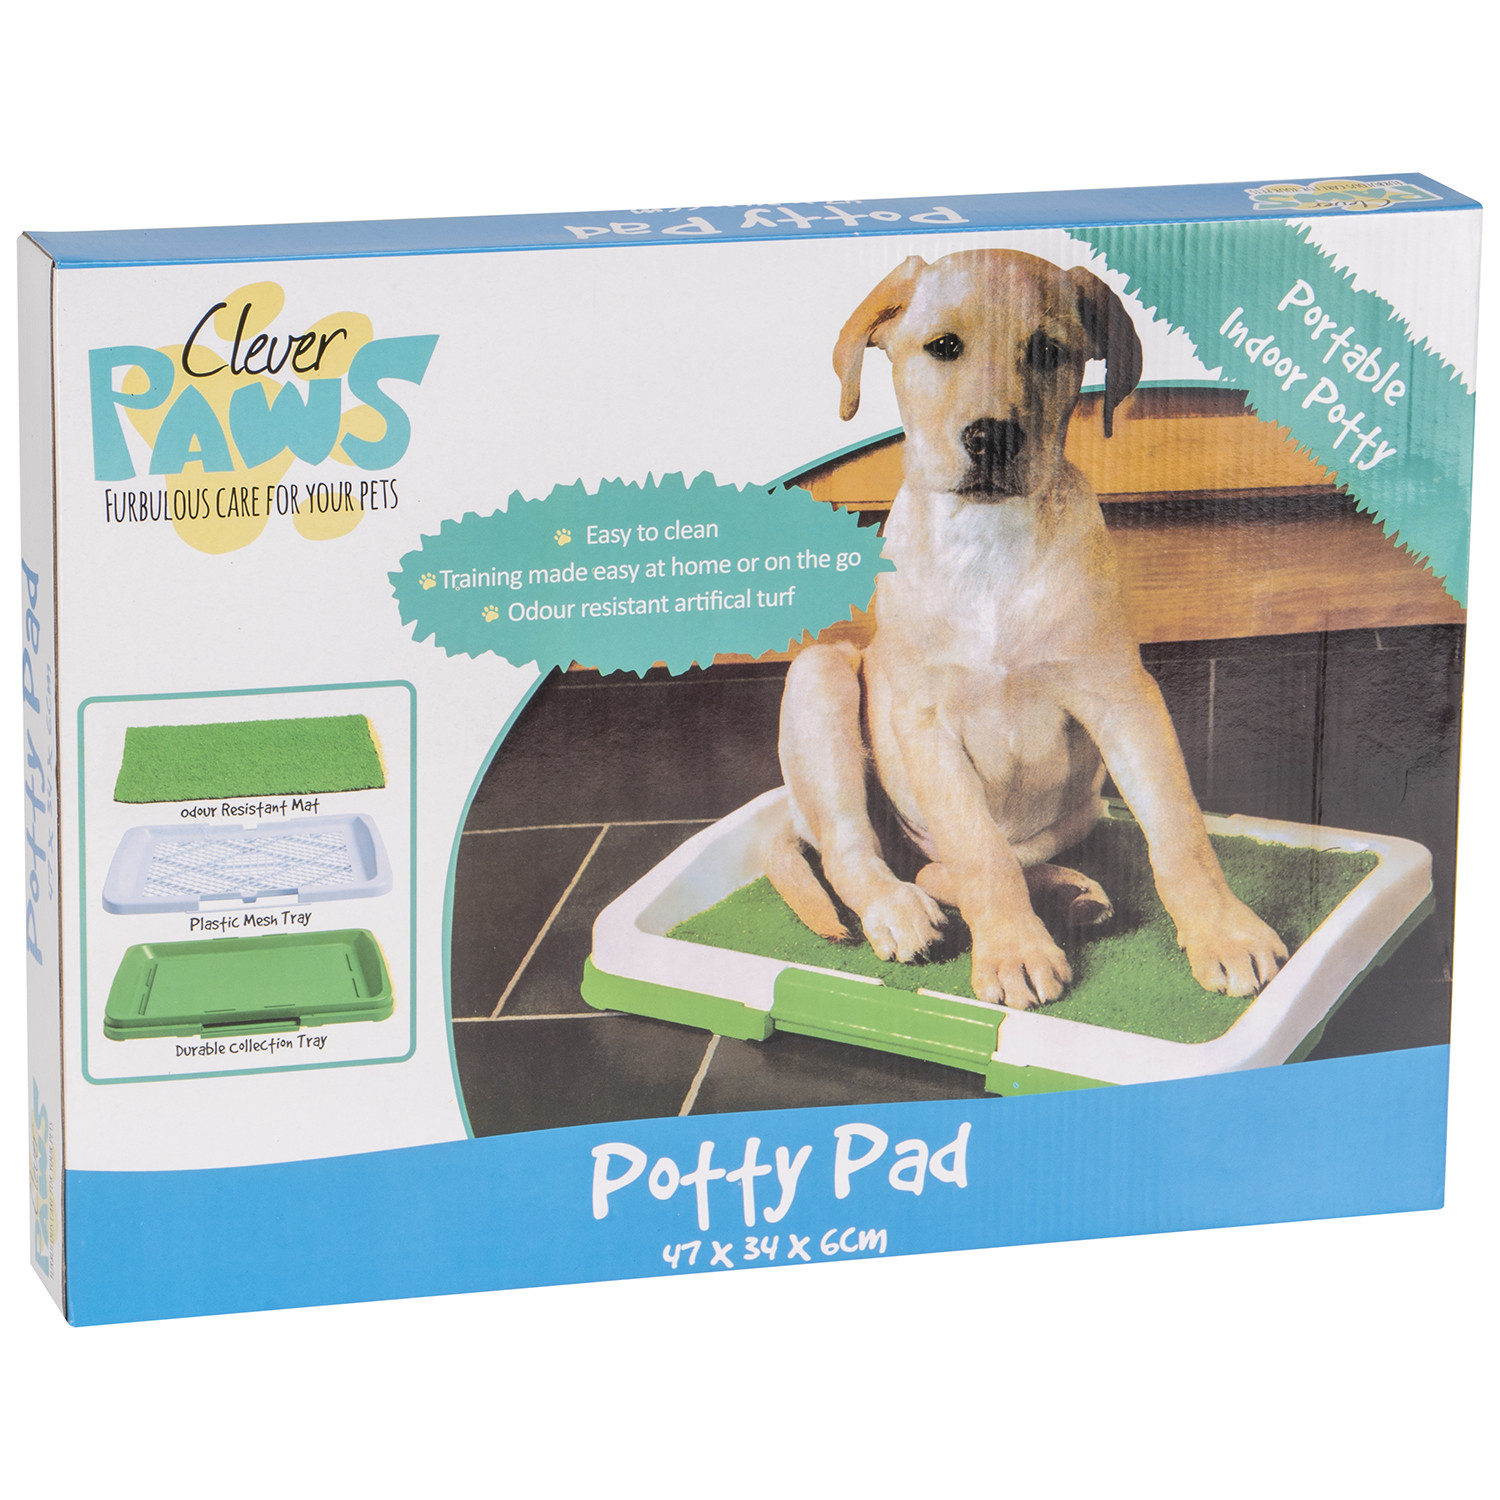 Clever Paws Potty Pad 47 x 34cm Image 1